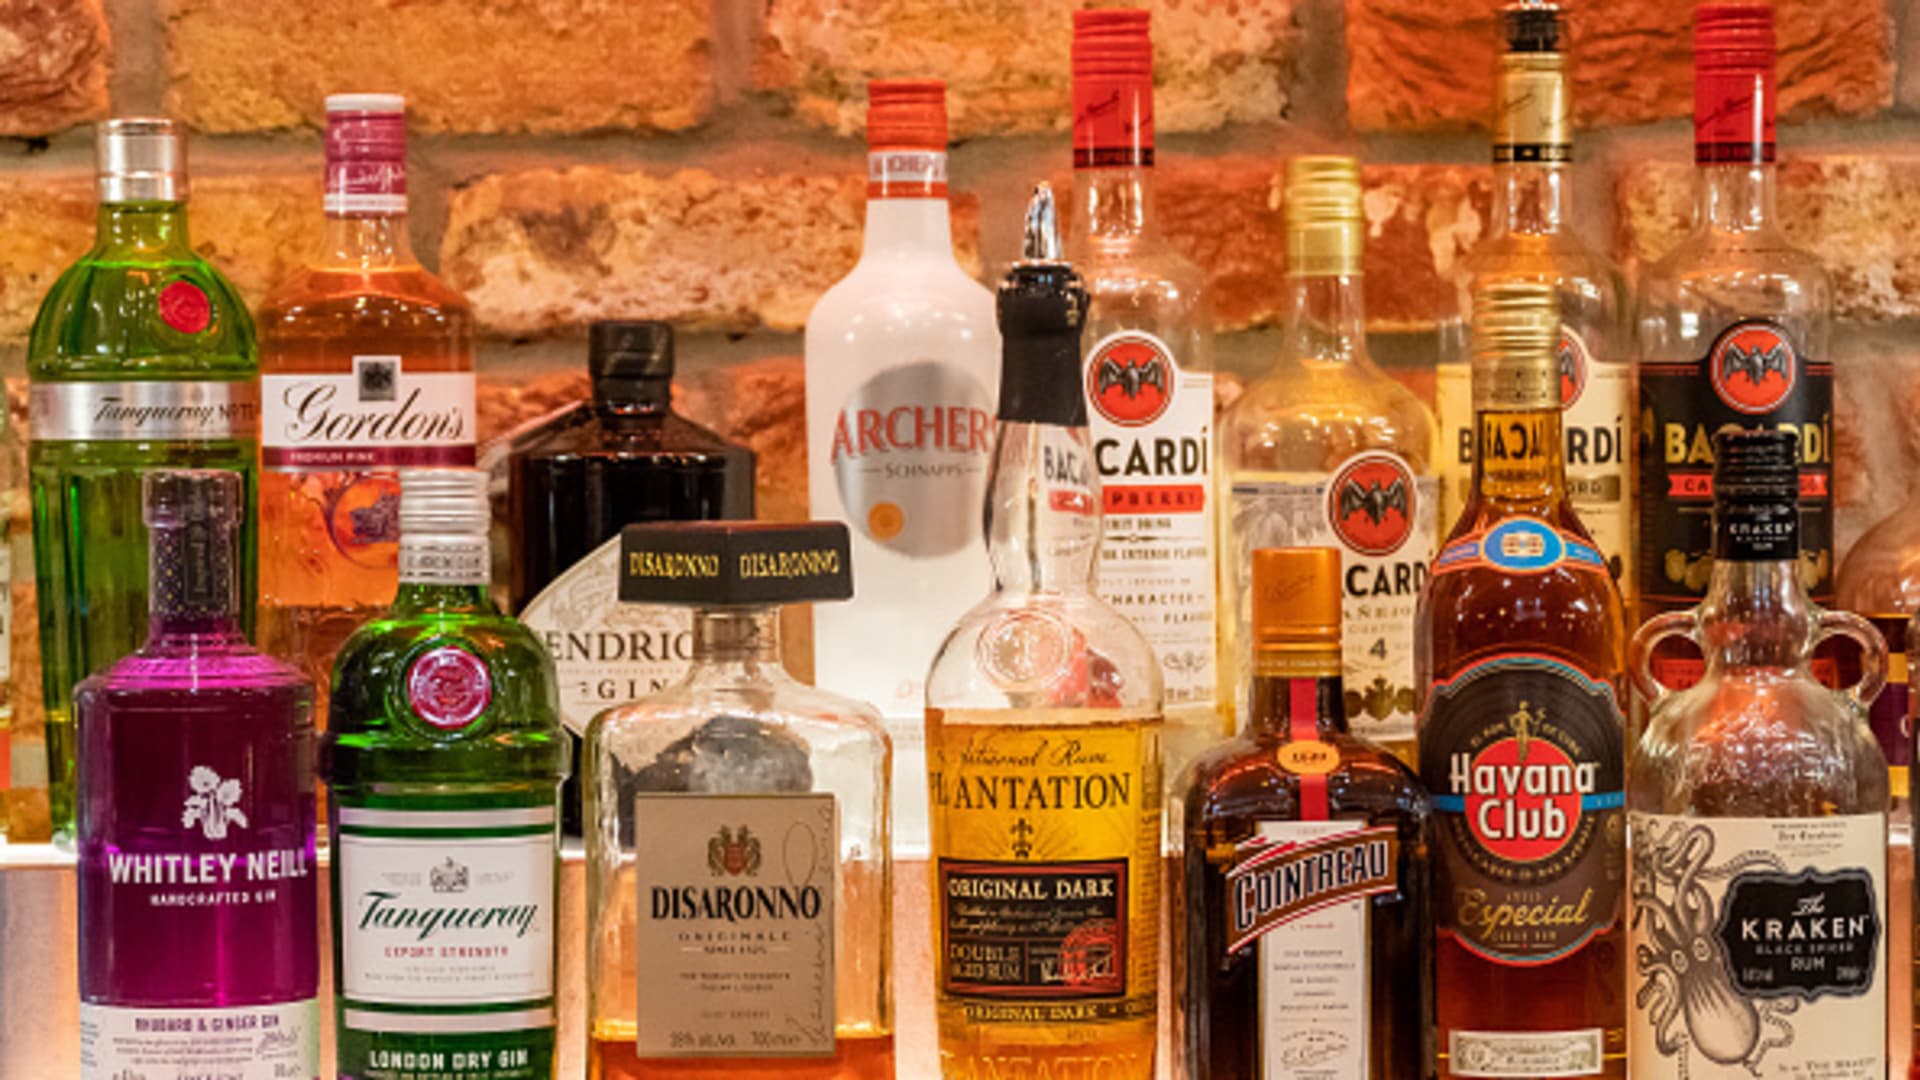 Spirits gross sales beat out beer and wine for second straight yr, regardless of little progress